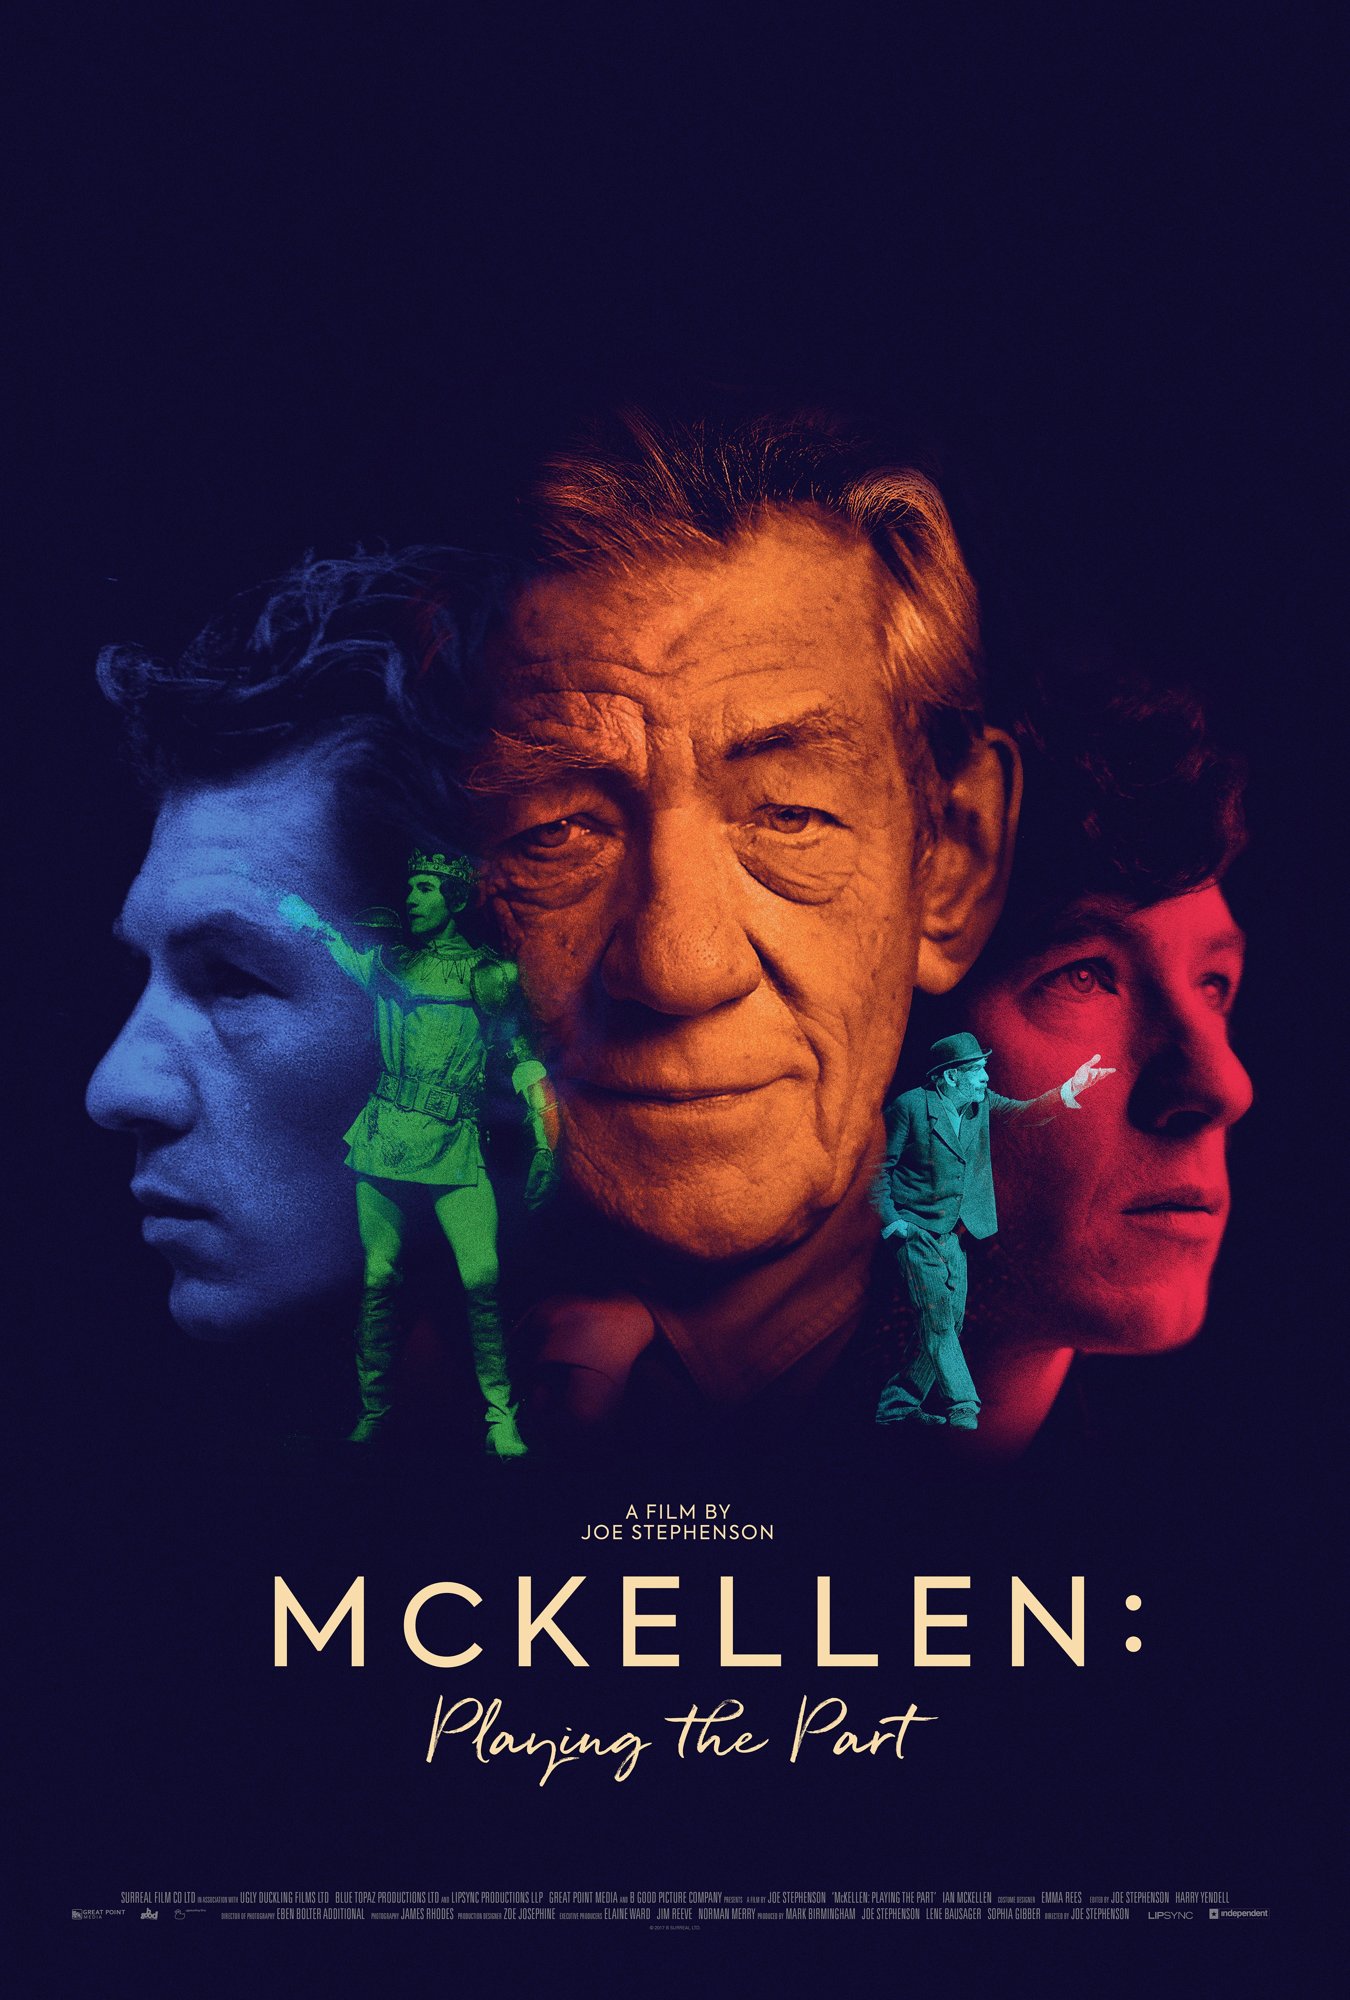 McKellen: Playing the Part (2018) Pictures, Trailer, Reviews, News, DVD and Soundtrack1350 x 2000